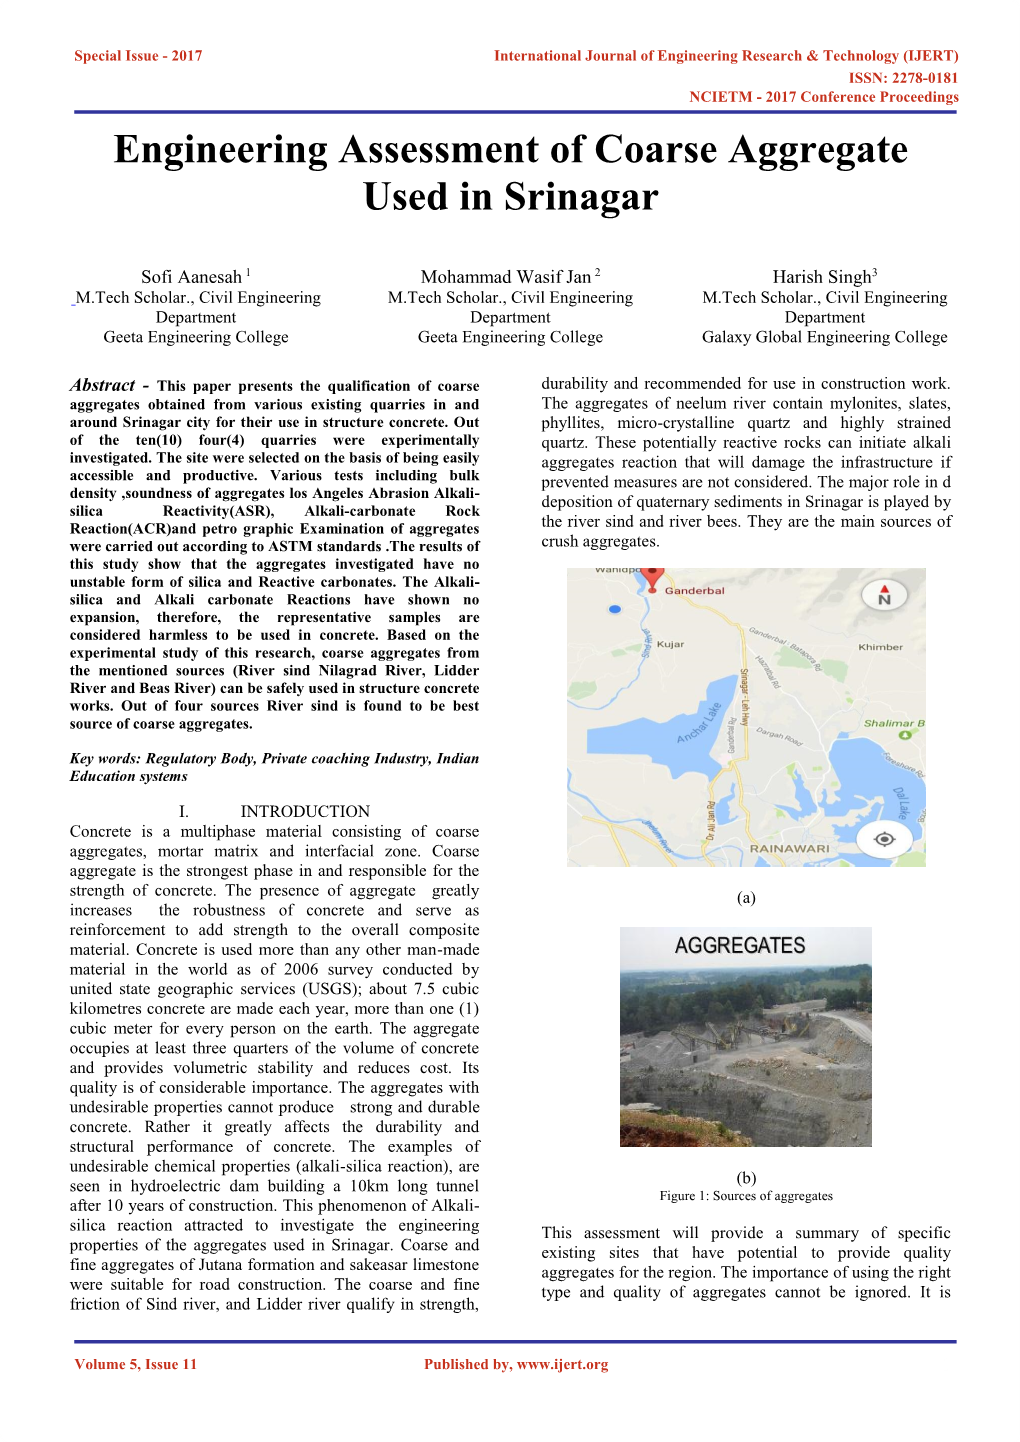 Engineering Assessment of Coarse Aggregate Used in Srinagar